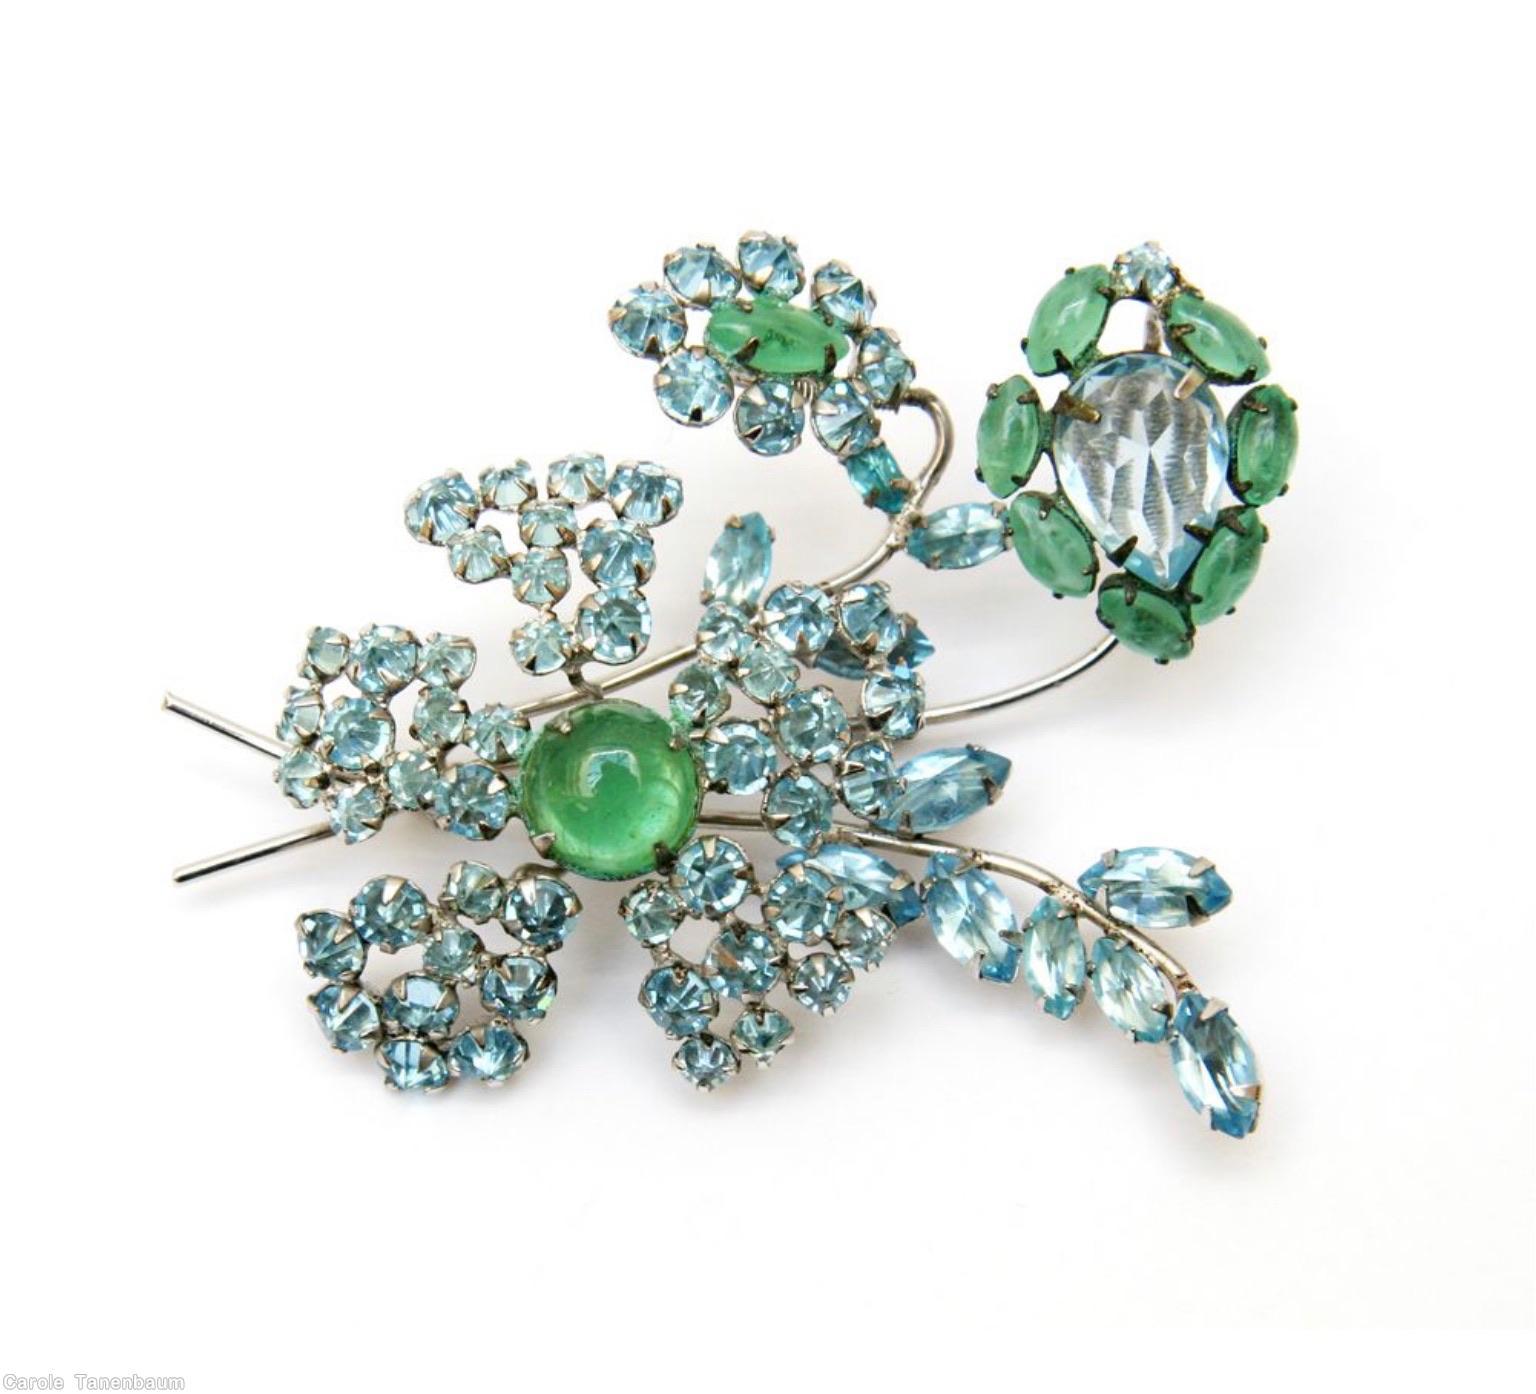 Schreiner 2 trembler flower 3 branch bunch pin 1 large teardrop 2 large oval cab apple green large round cab apple green navette ice blue inverted+silvertone jewelry